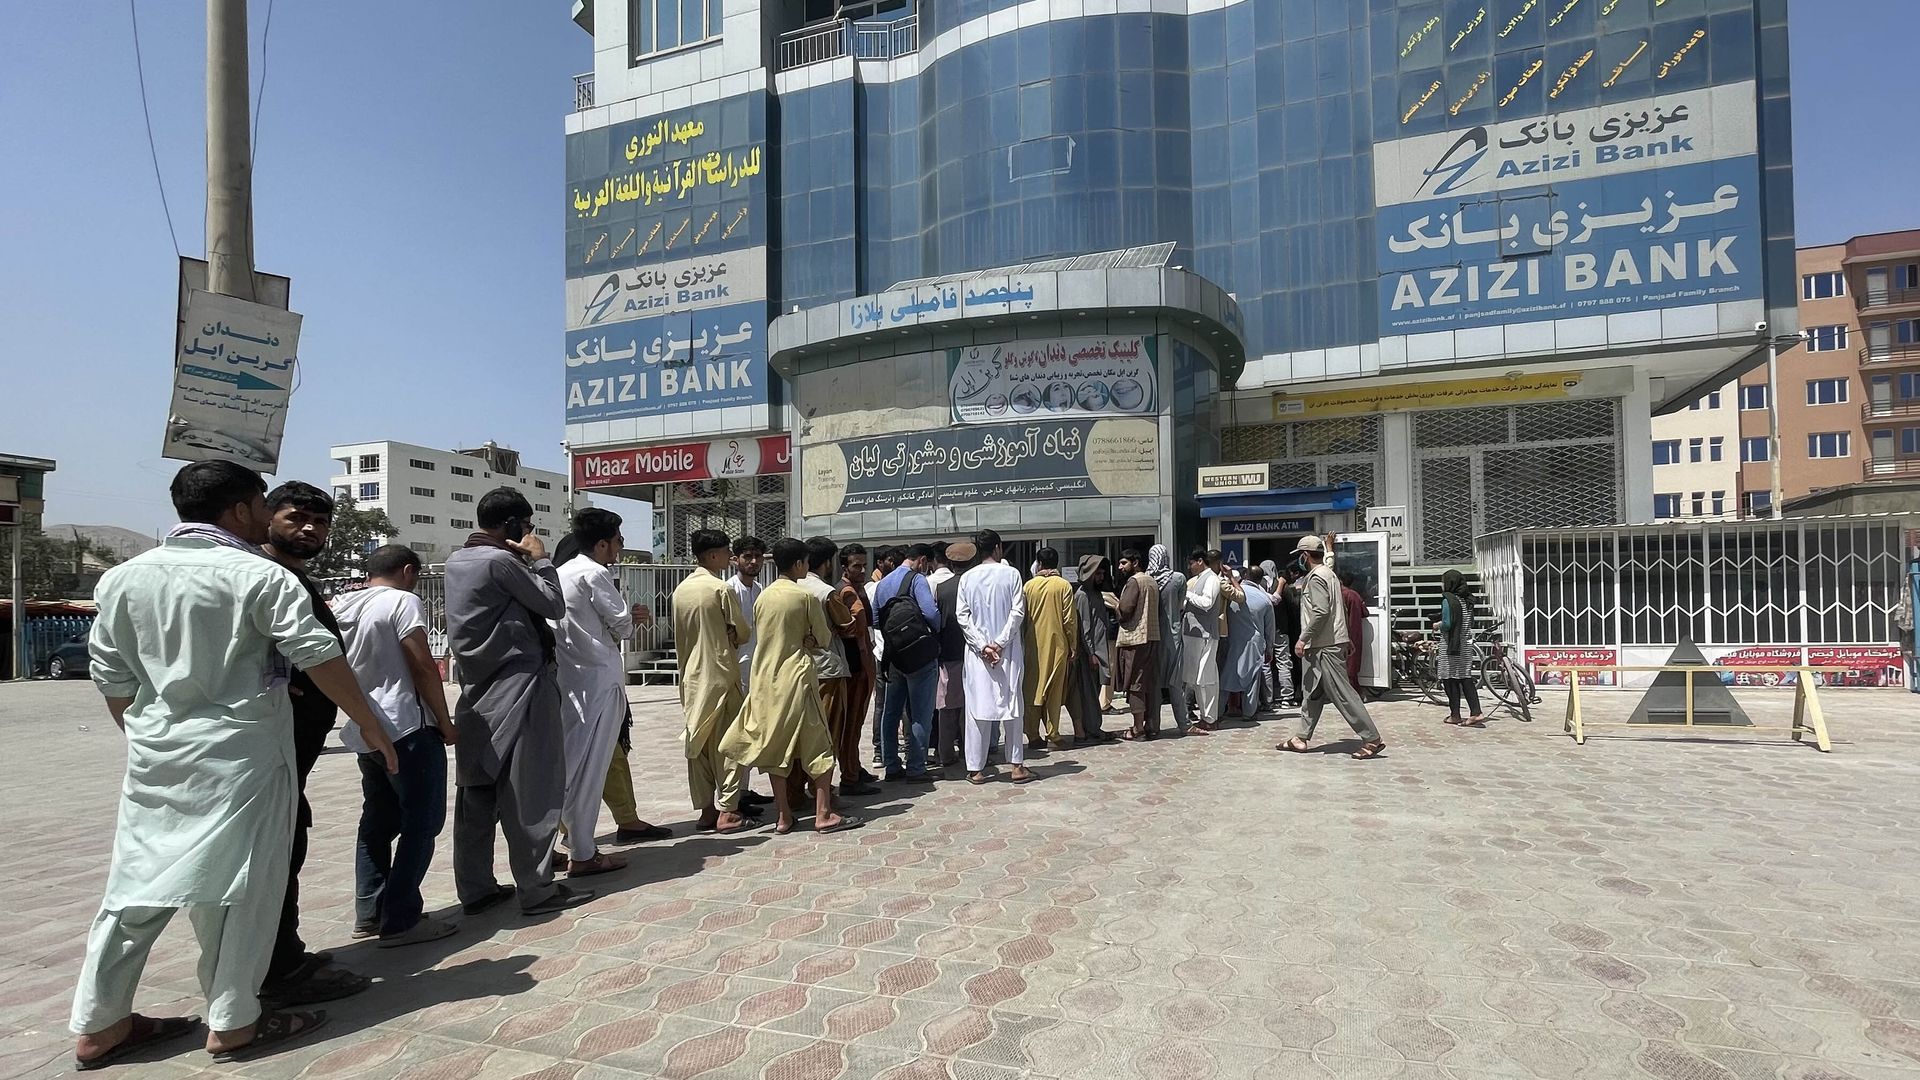 Afghan people line up outside a bank to get cash as the Taliban take Kabul.